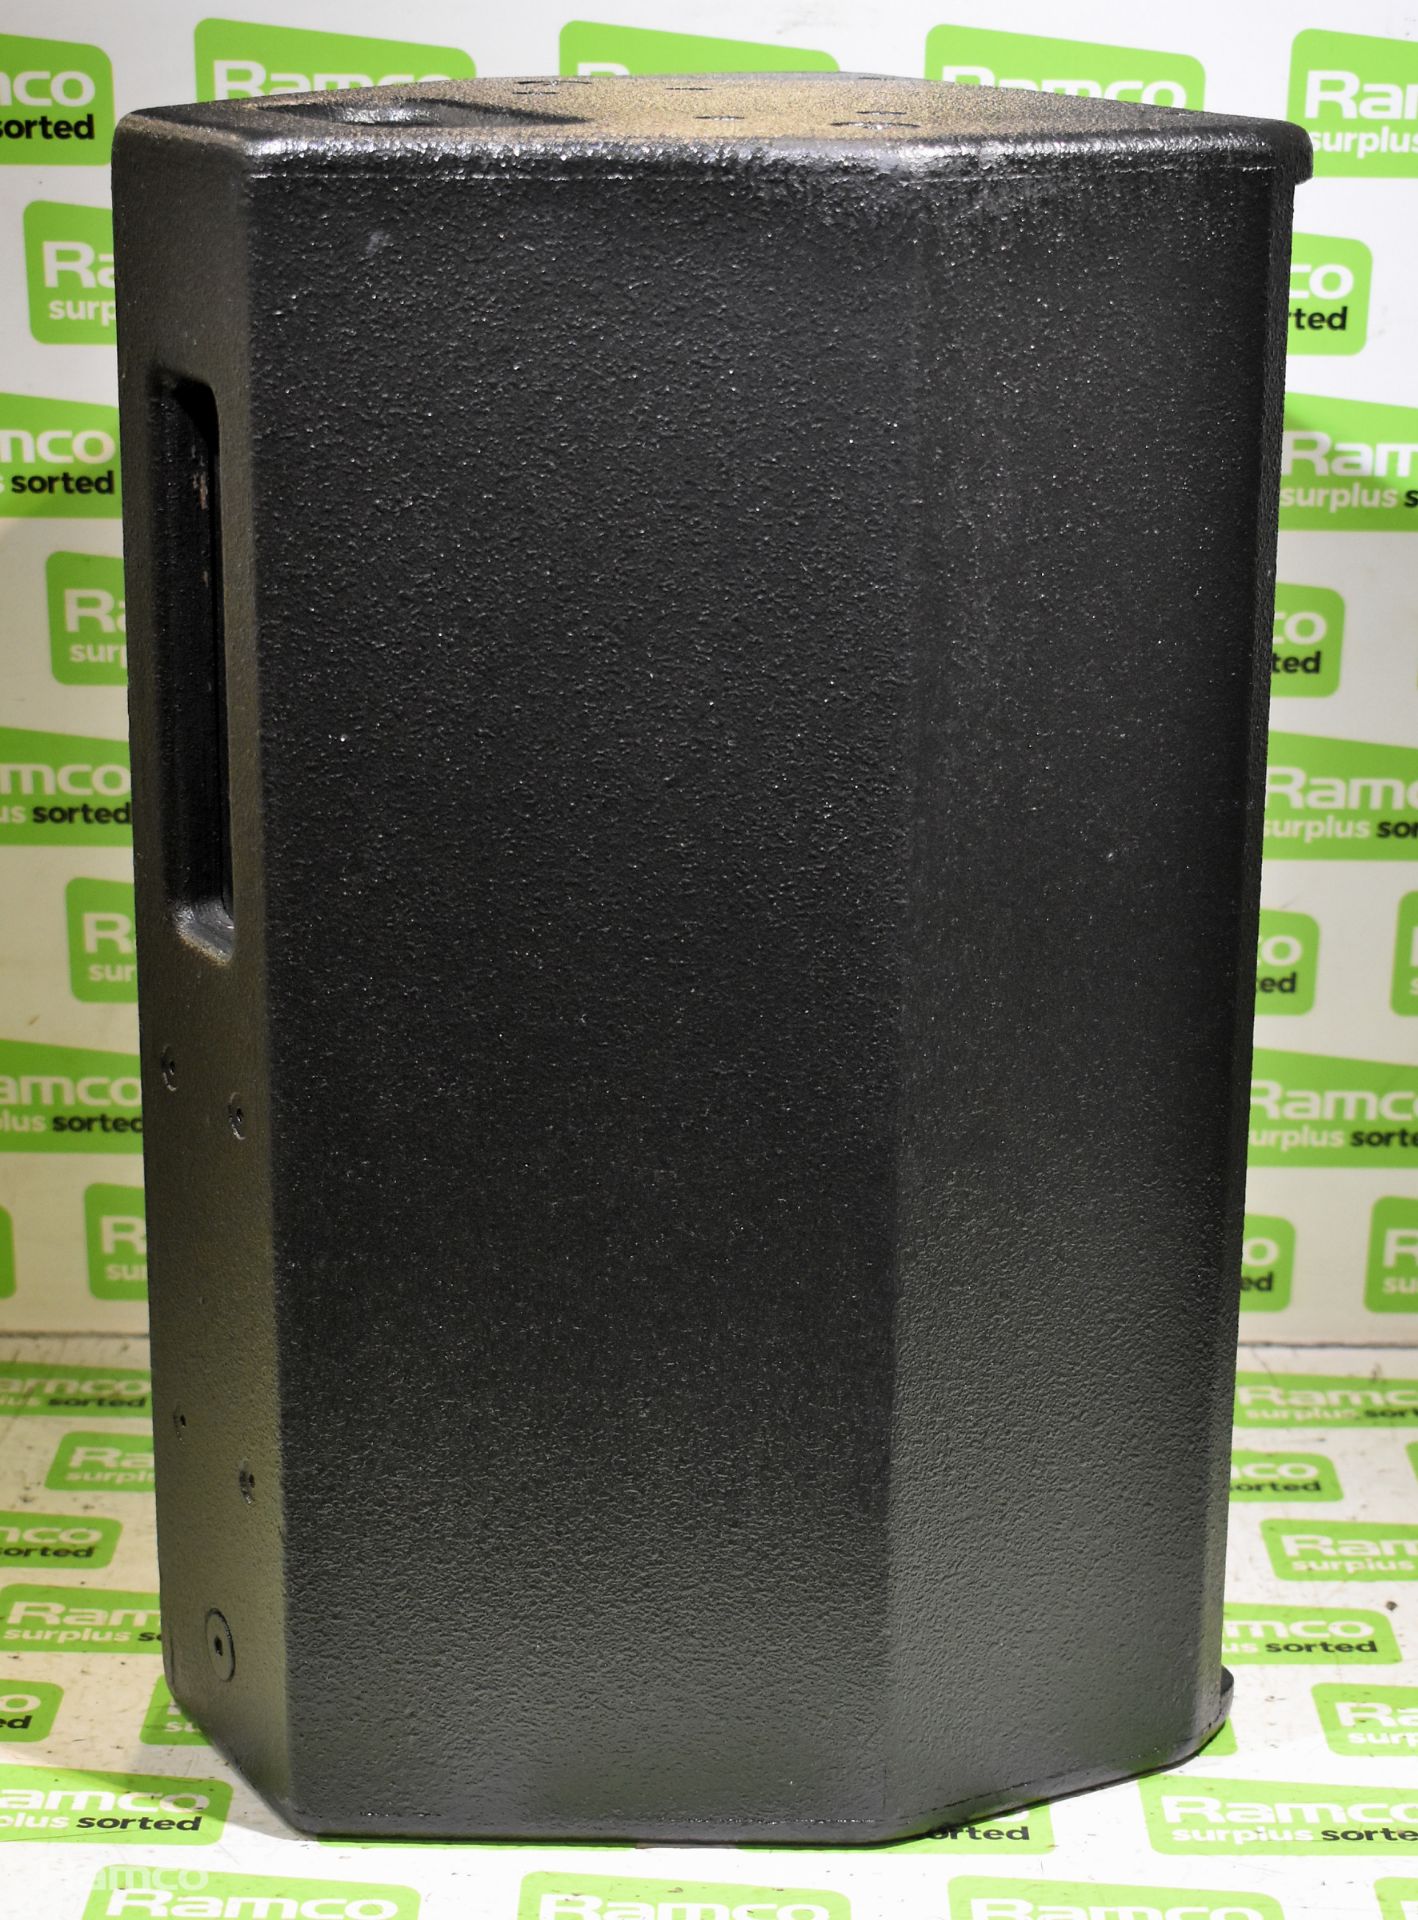 2x Logic LS8 loudspeakers - NL4 connection - recently painted with soft bag - Image 4 of 8